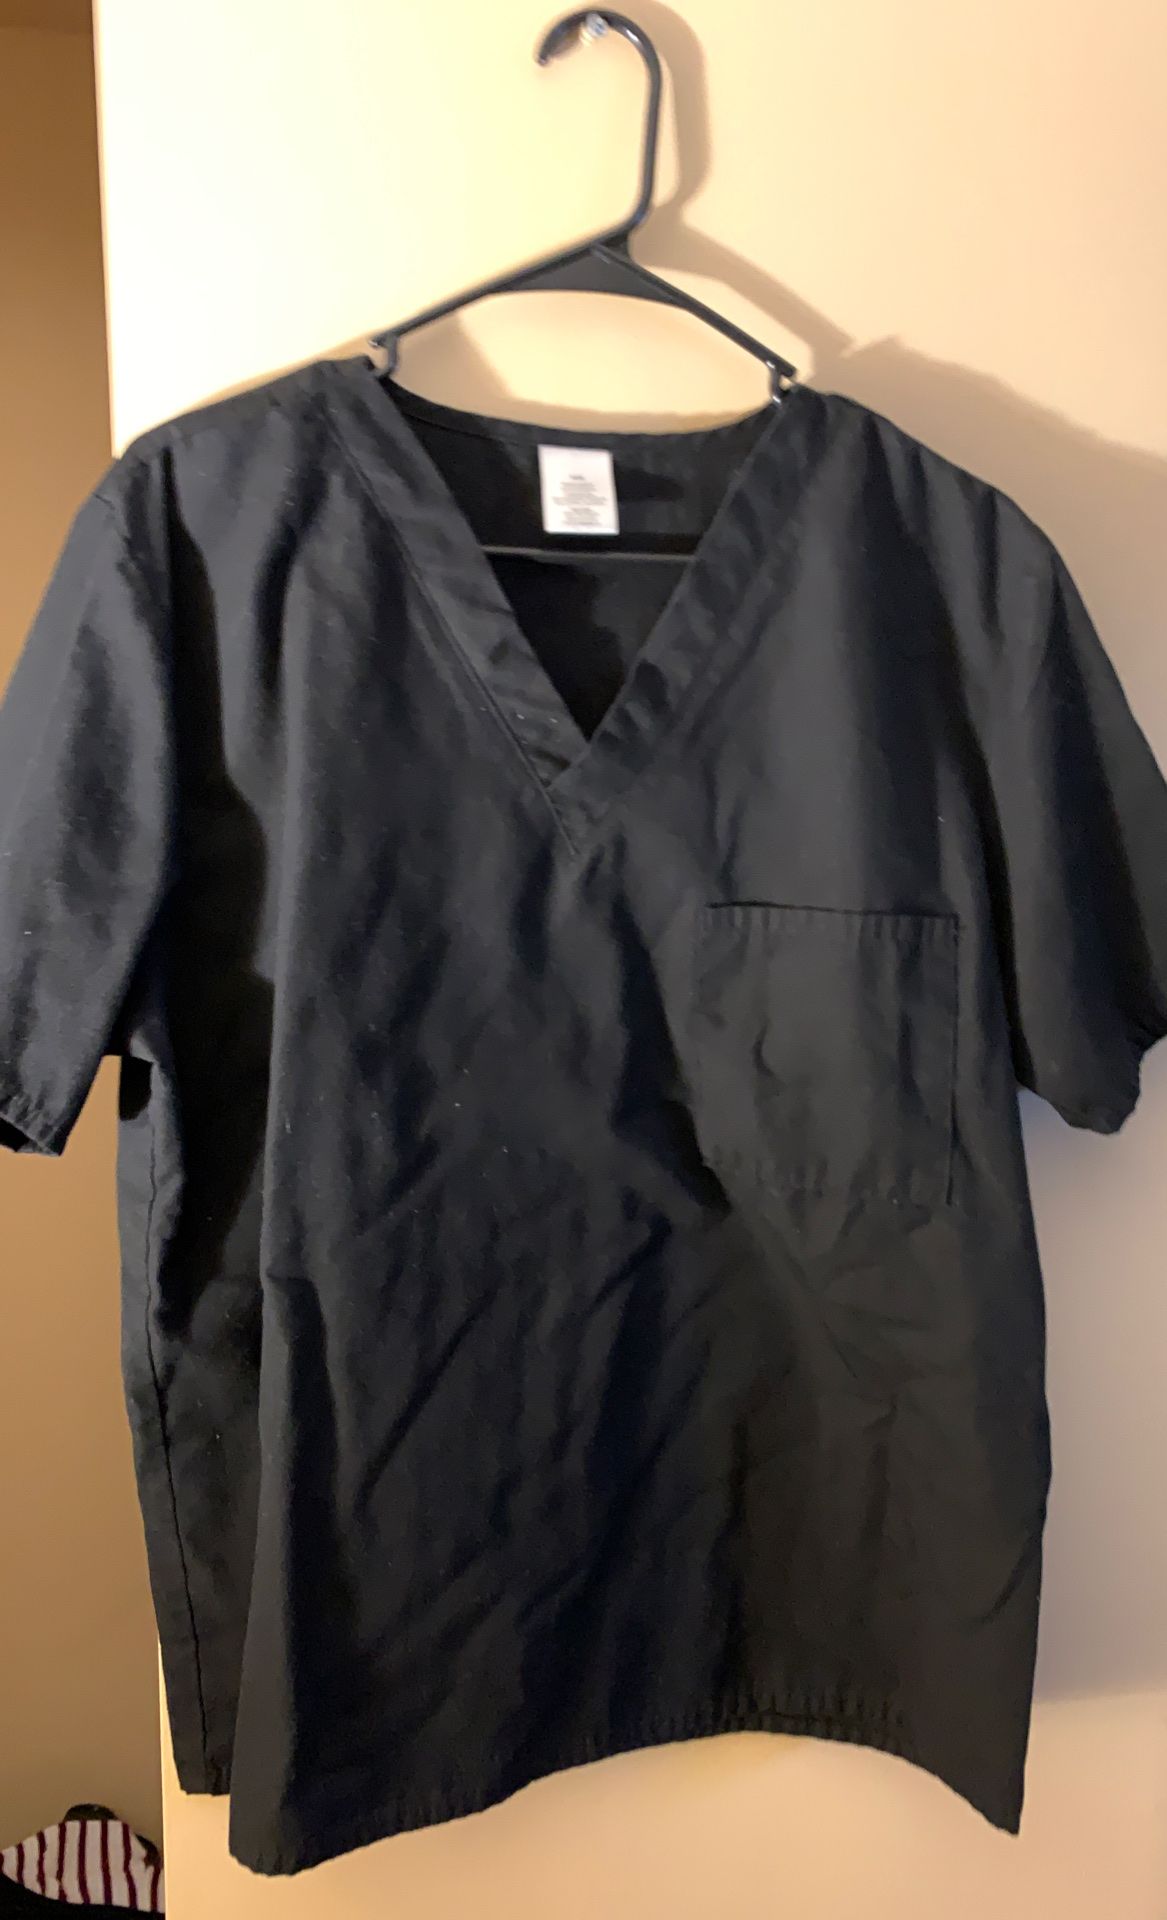 Small size top only scrubs